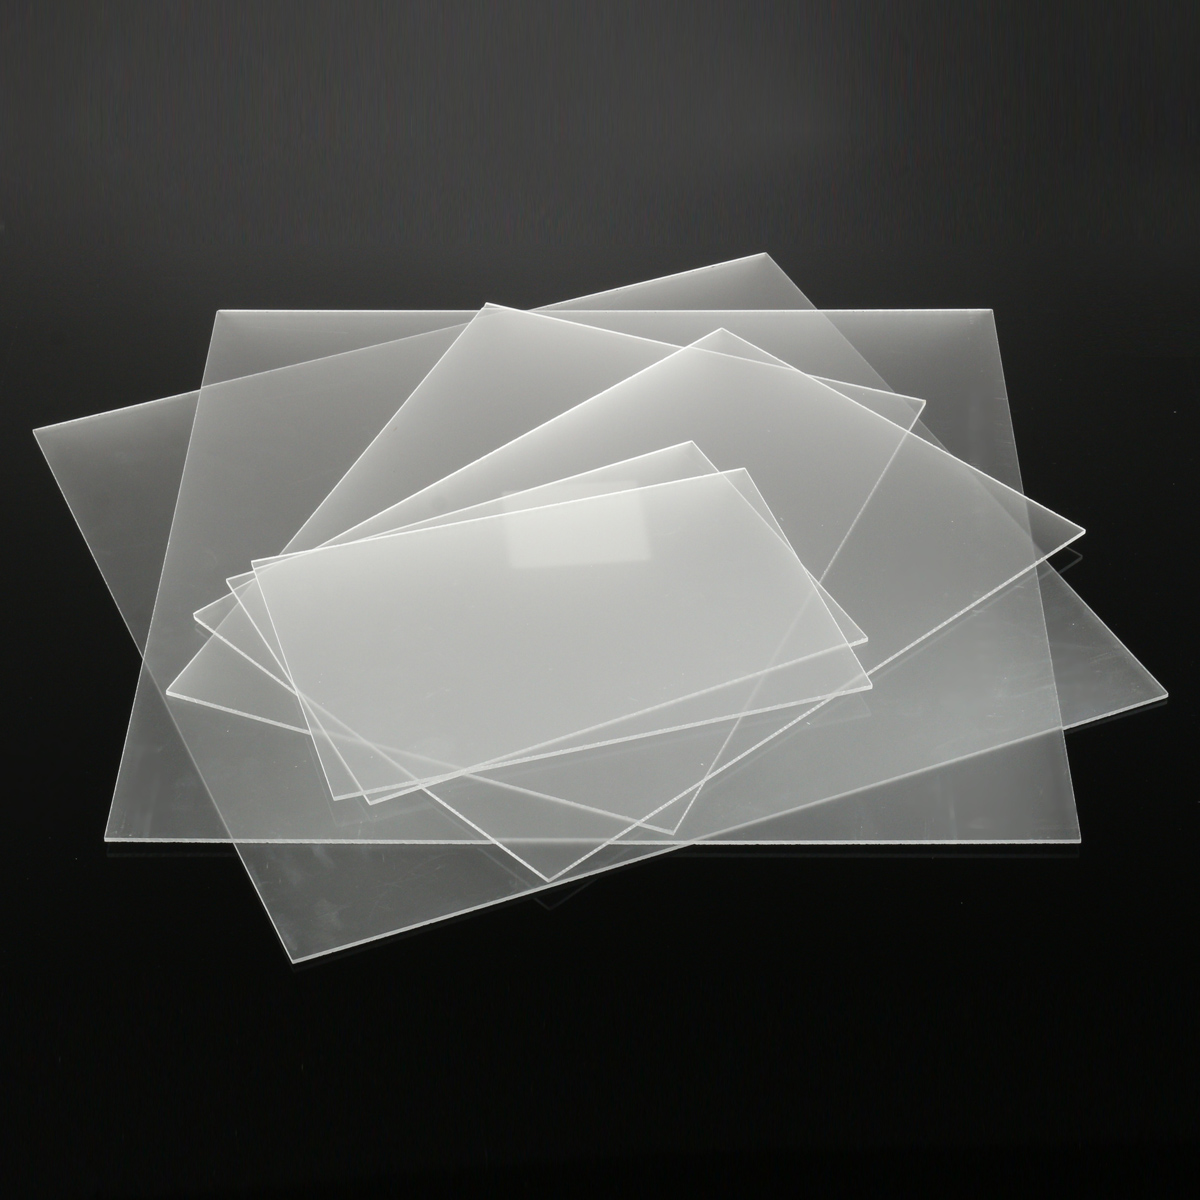 3mm one-sized frosted acrylic sheet clear satin matte finish plastic panel 6 sizes Sale How To Make Clear Acrylic Frosted